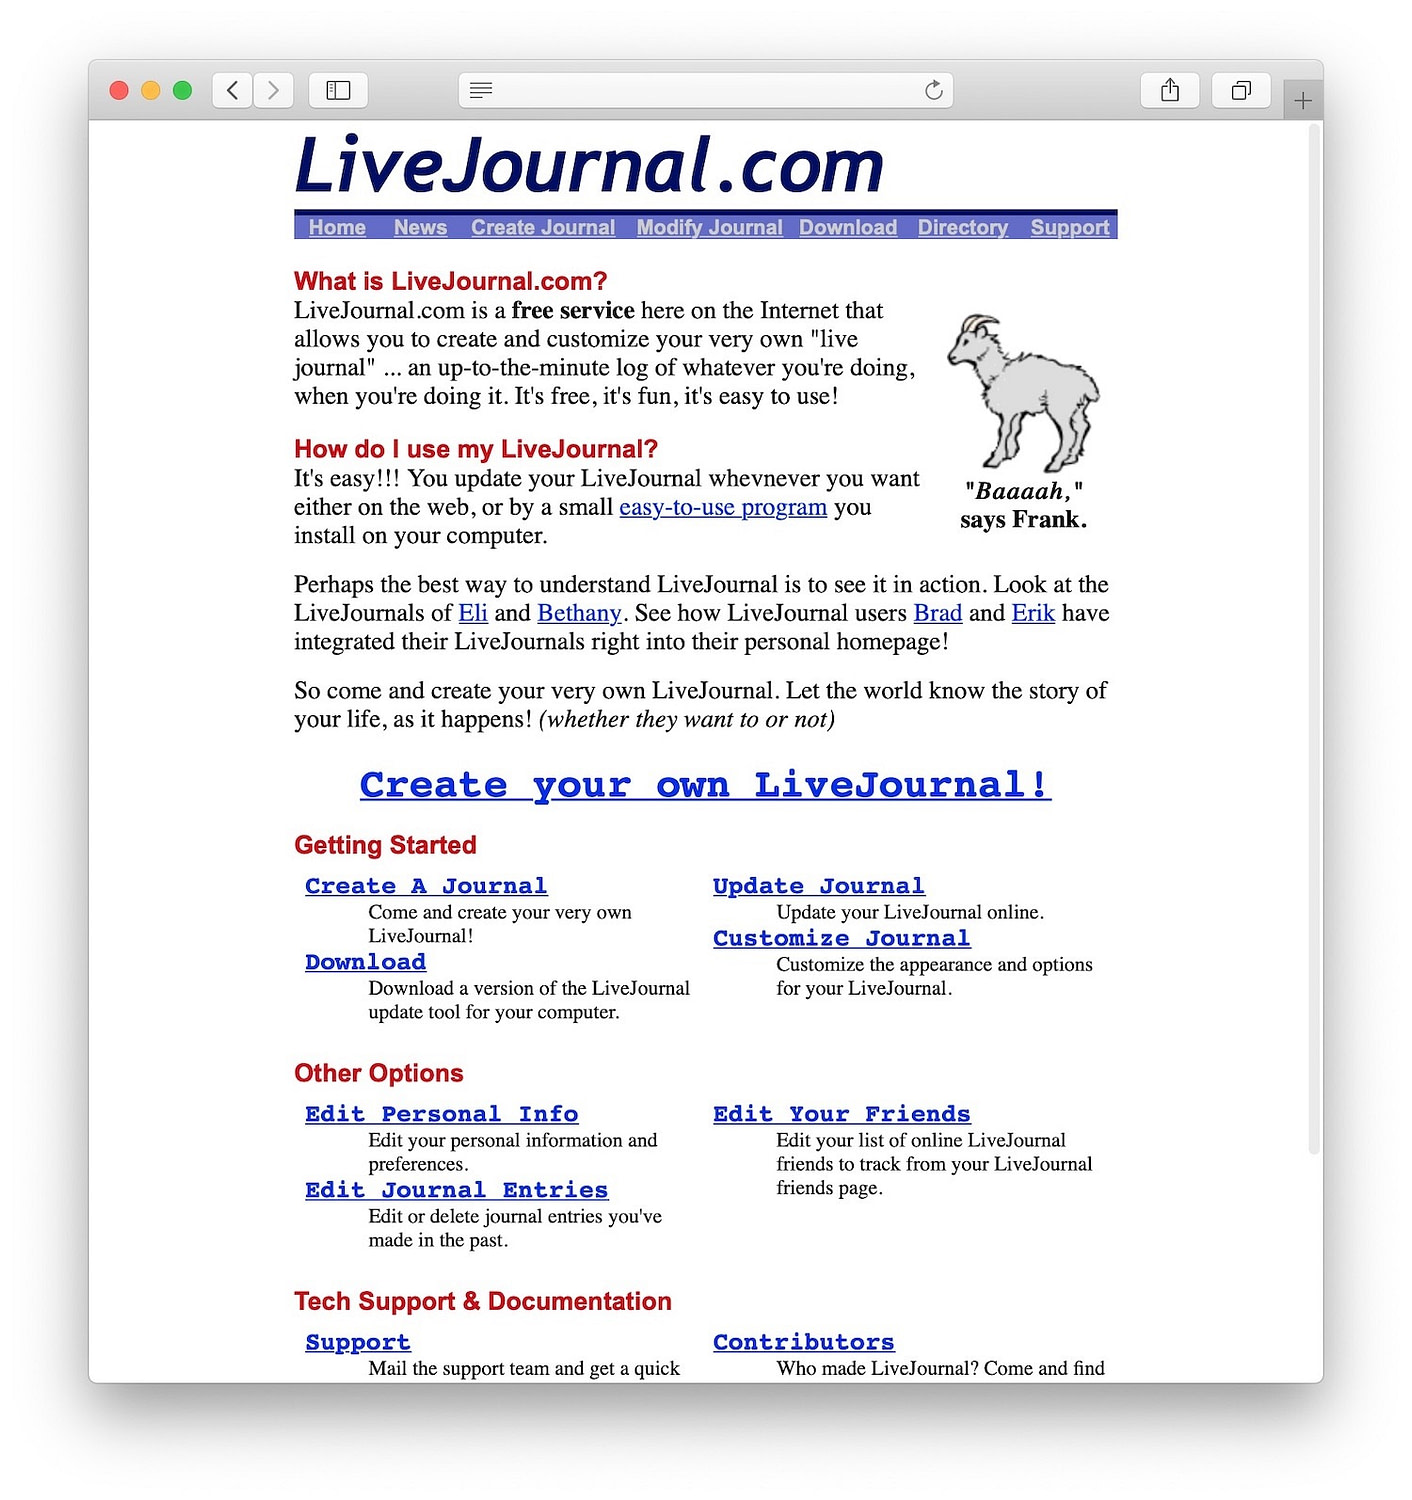 LiveJournal was one of the first blogging platforms in history